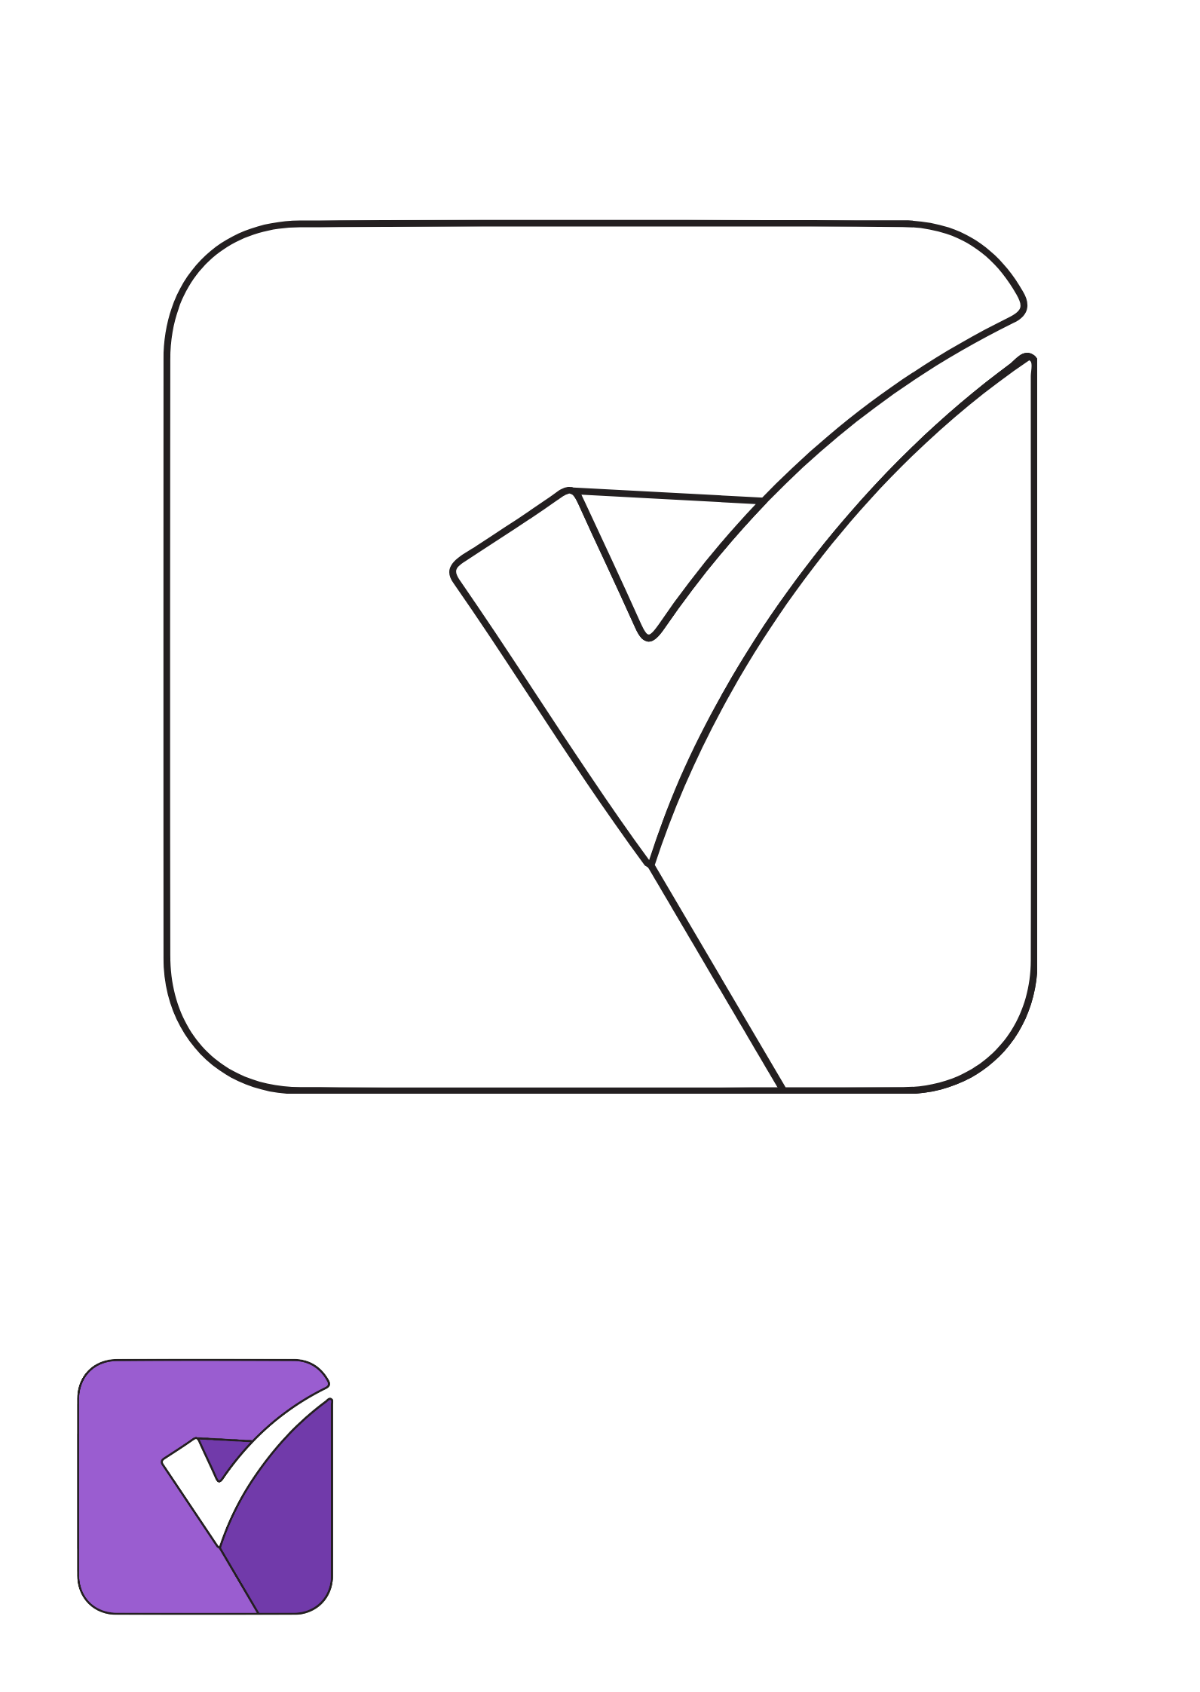 Purple Check Mark coloring page Template